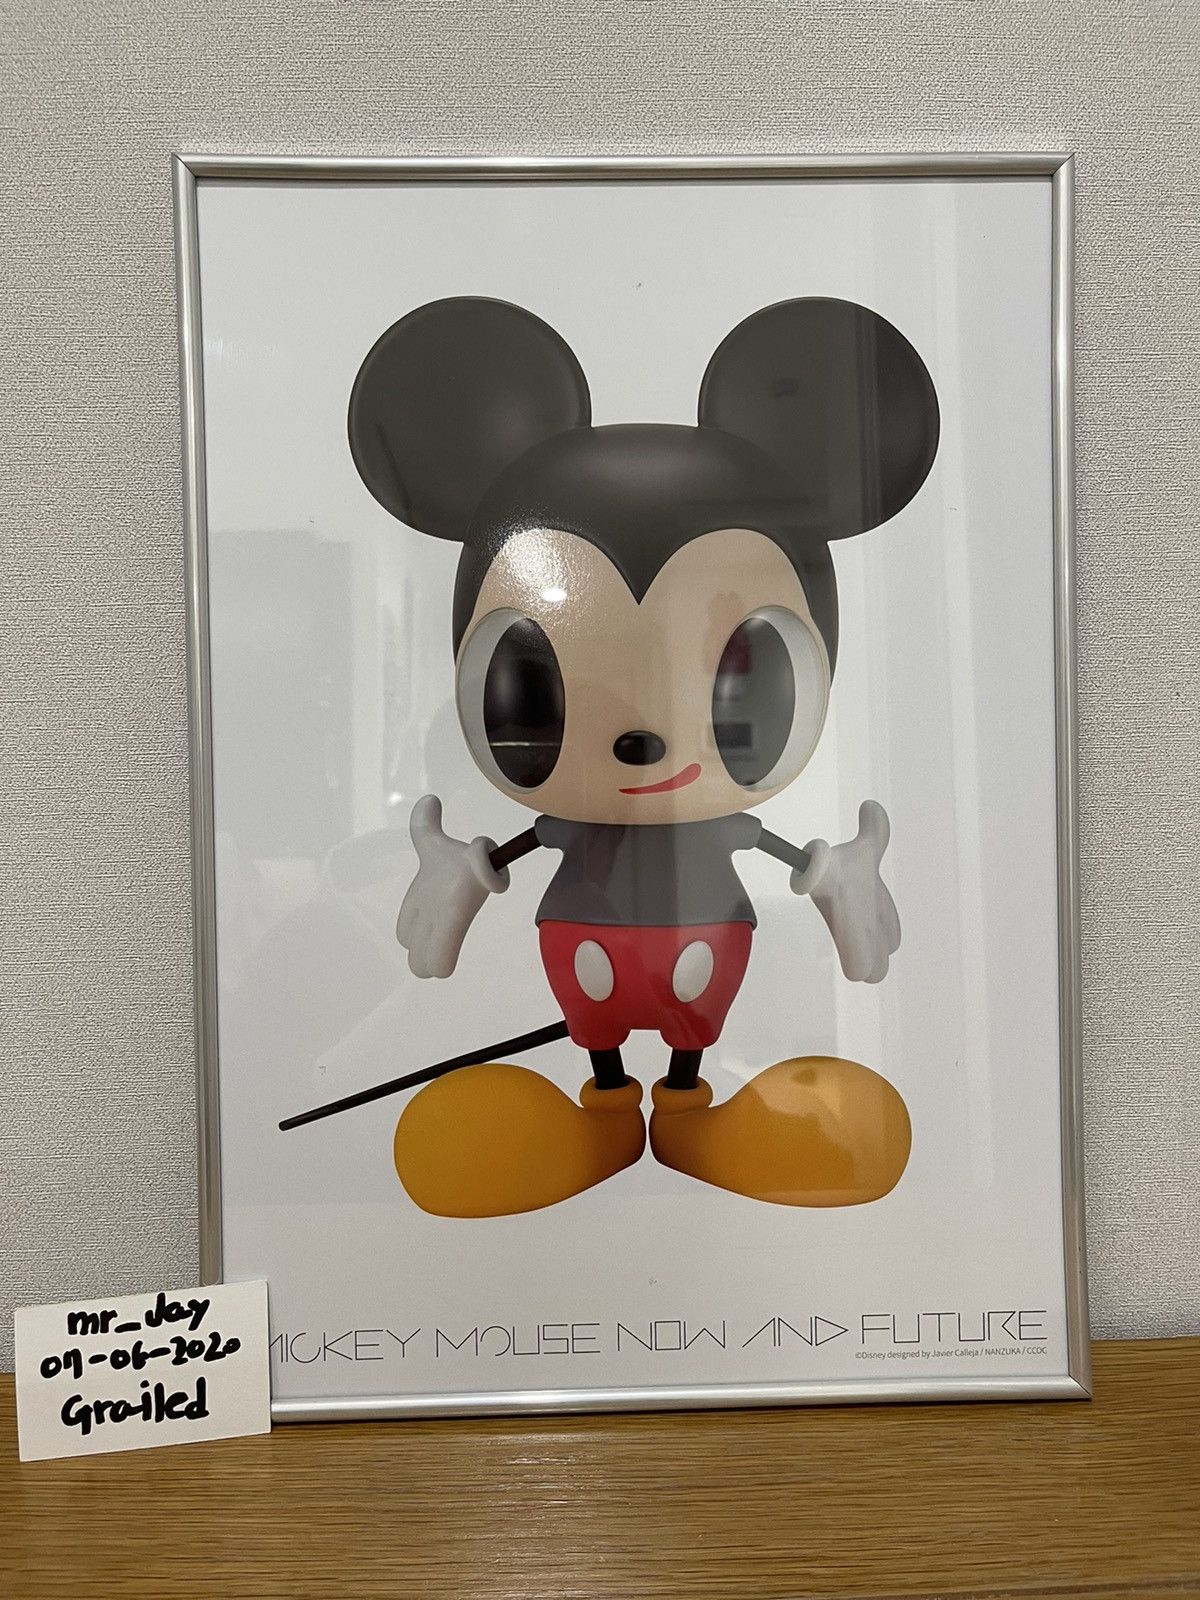 Mickey Mouse Javier Calleja Mickey Mouse Now and Future NANZUKA poster |  Grailed